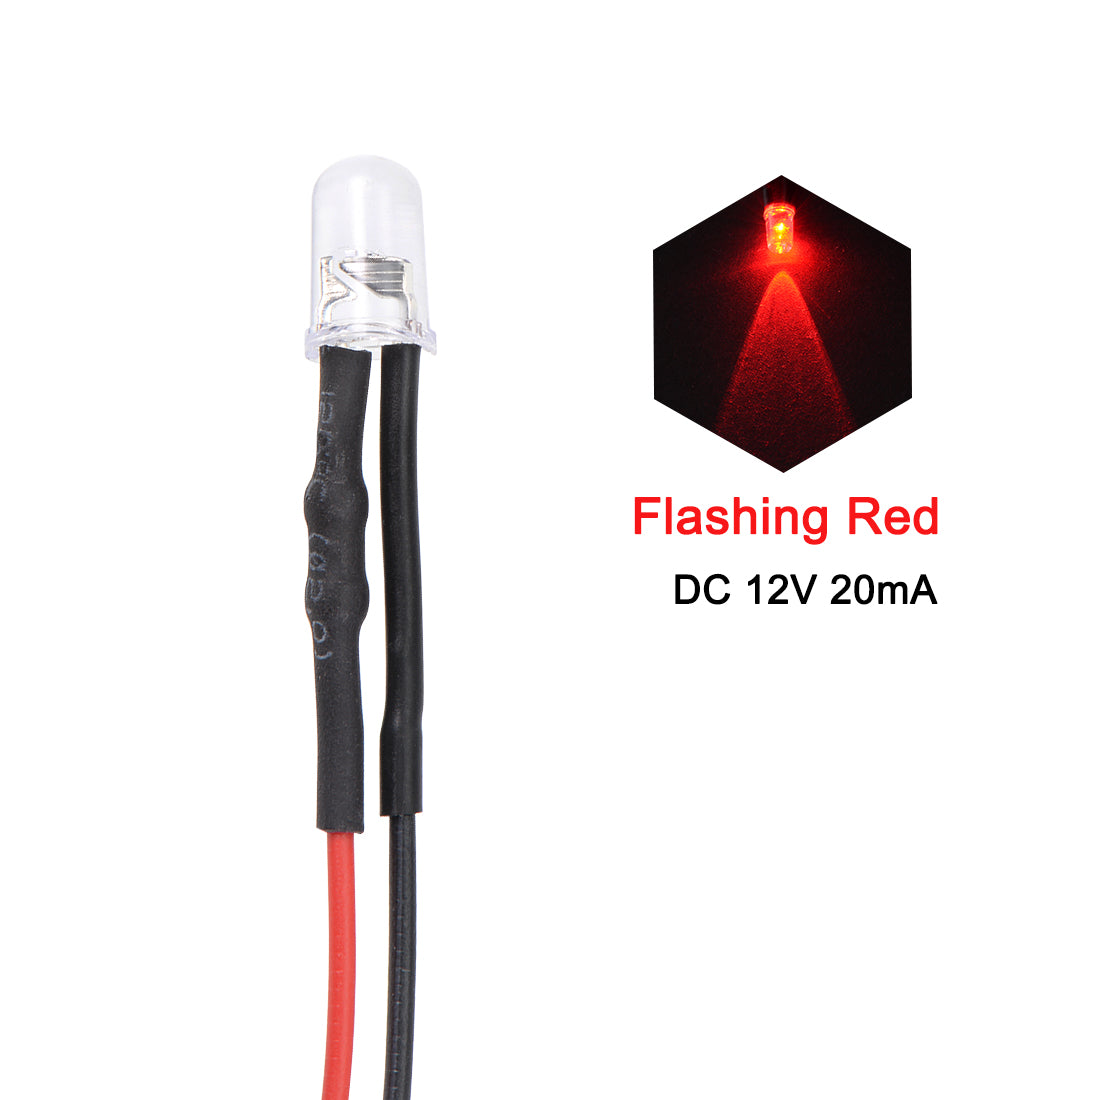 uxcell Uxcell 5Pcs DC 12V 5mm Pre Wired LED, Flashing Red Light Round Top Clear Lens, Light Emitting Diodes with Edge